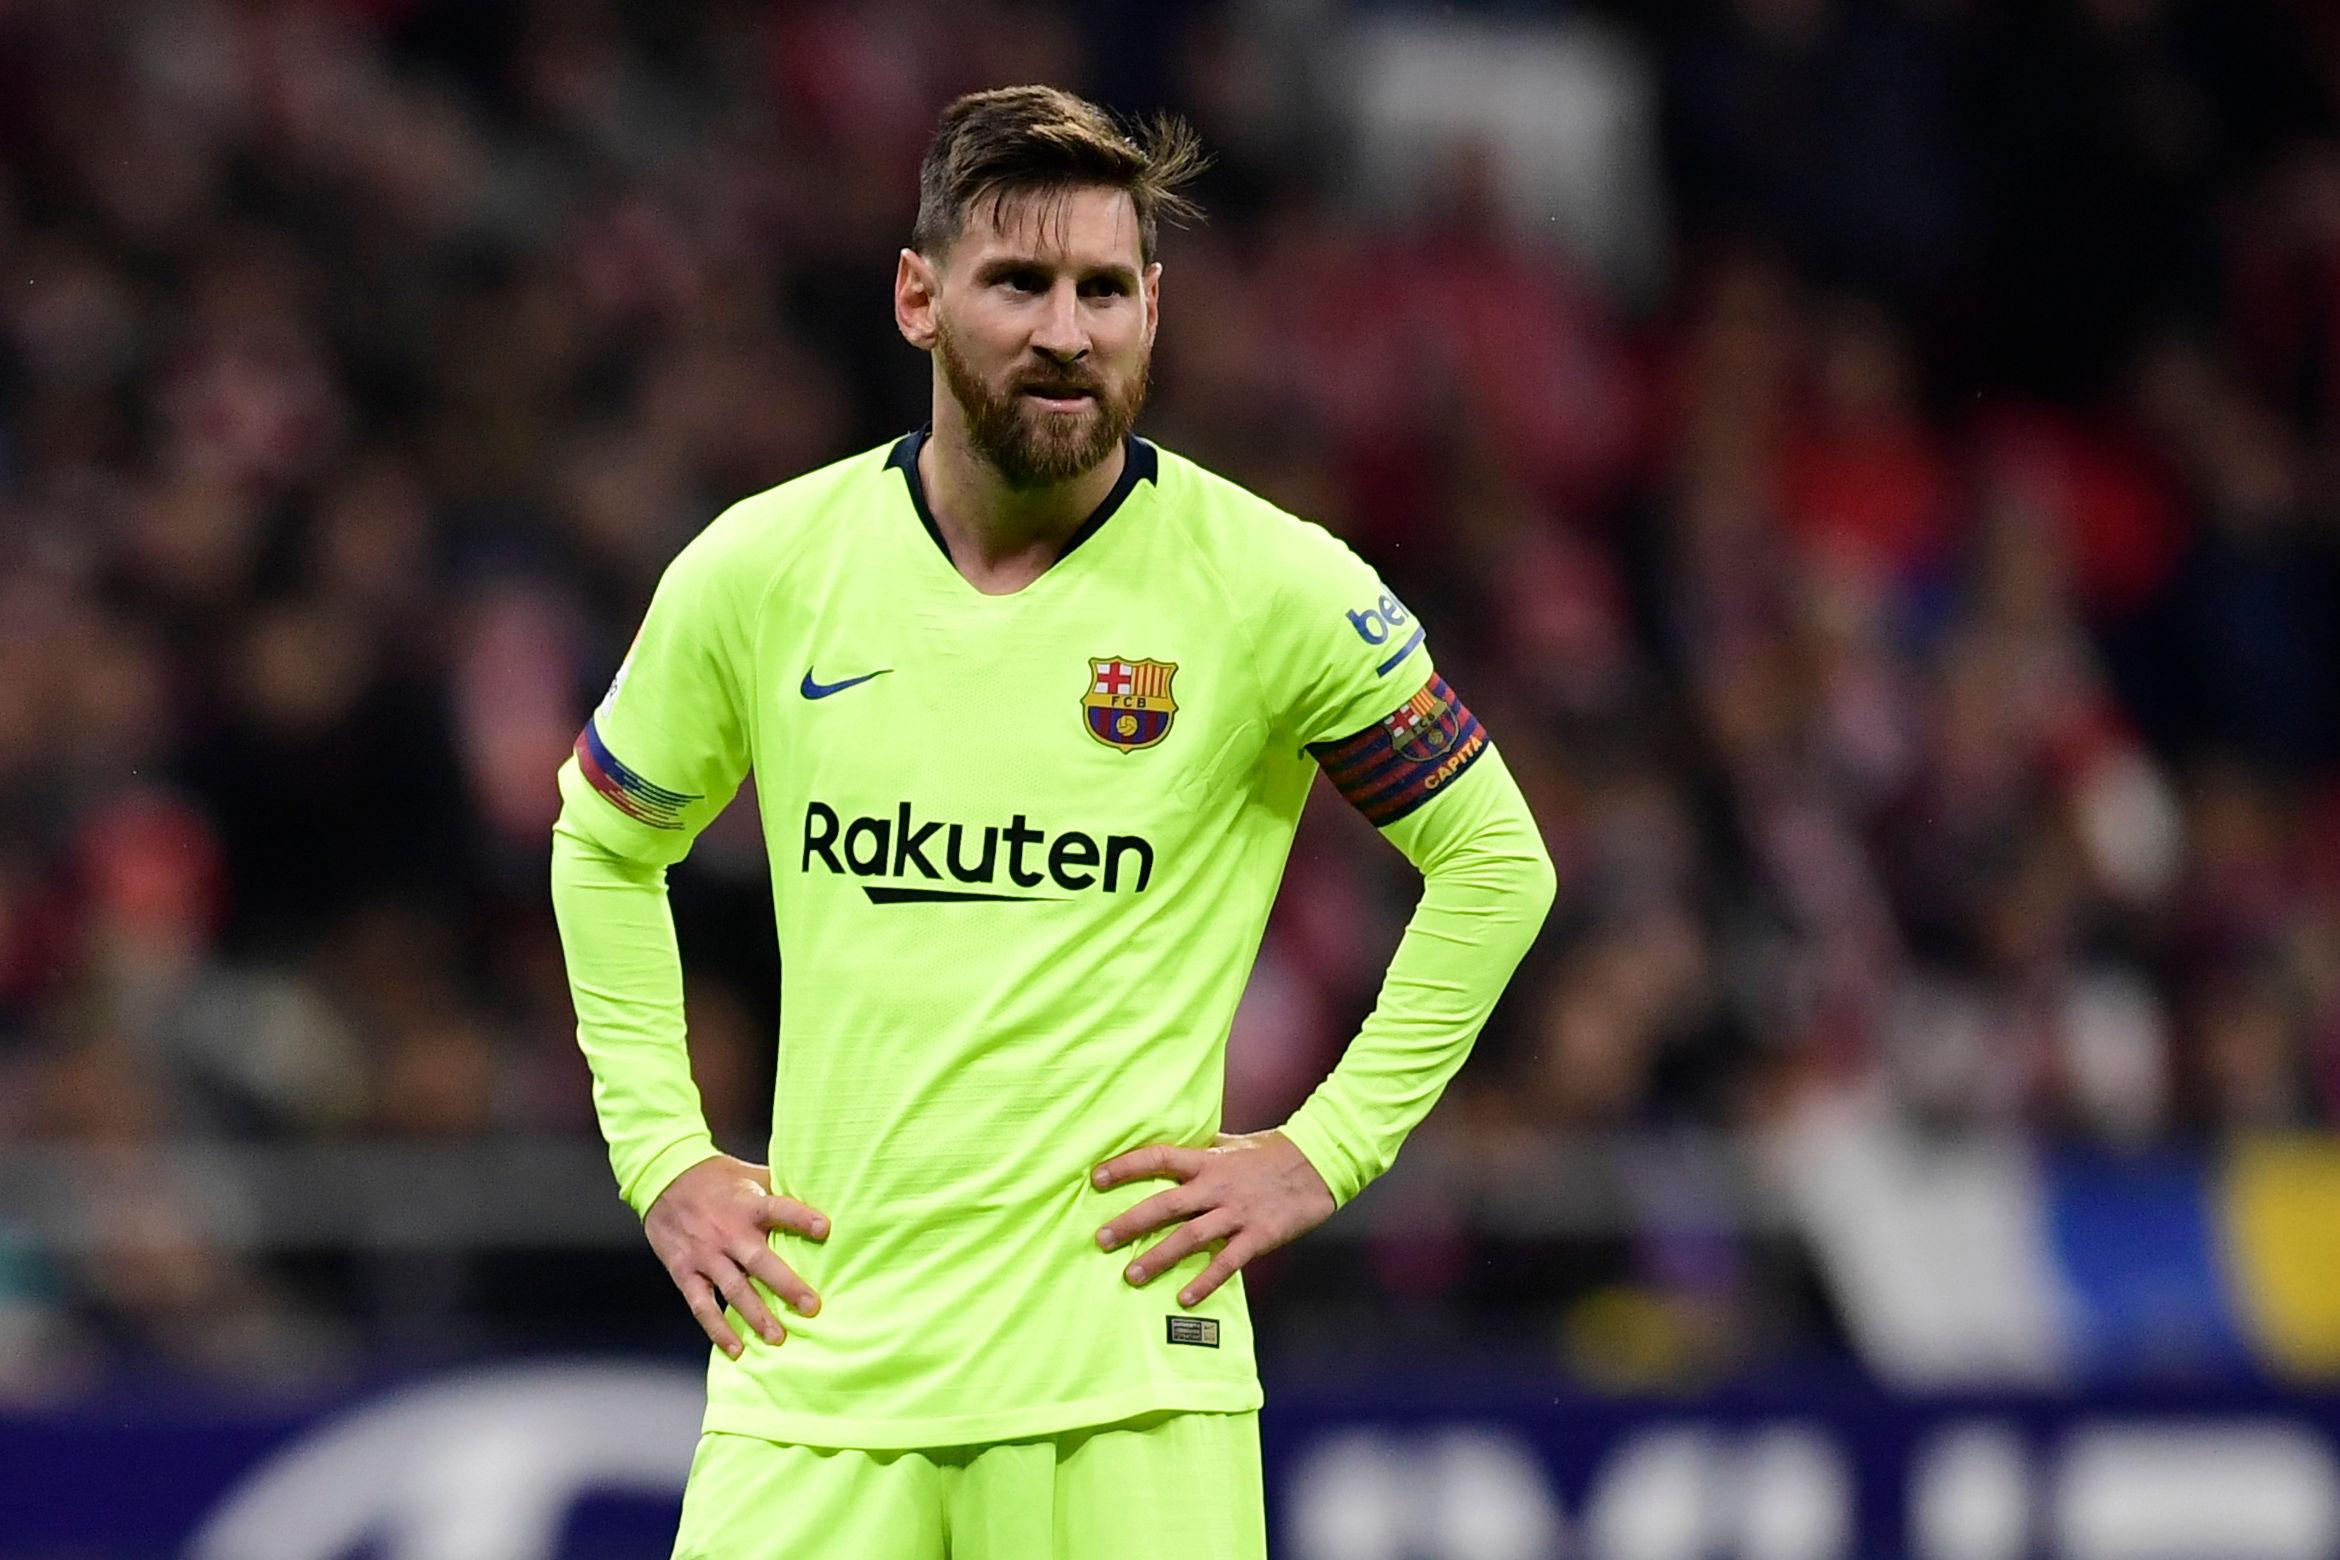 Barcelona confirms Lionel Messi will not continue with the club